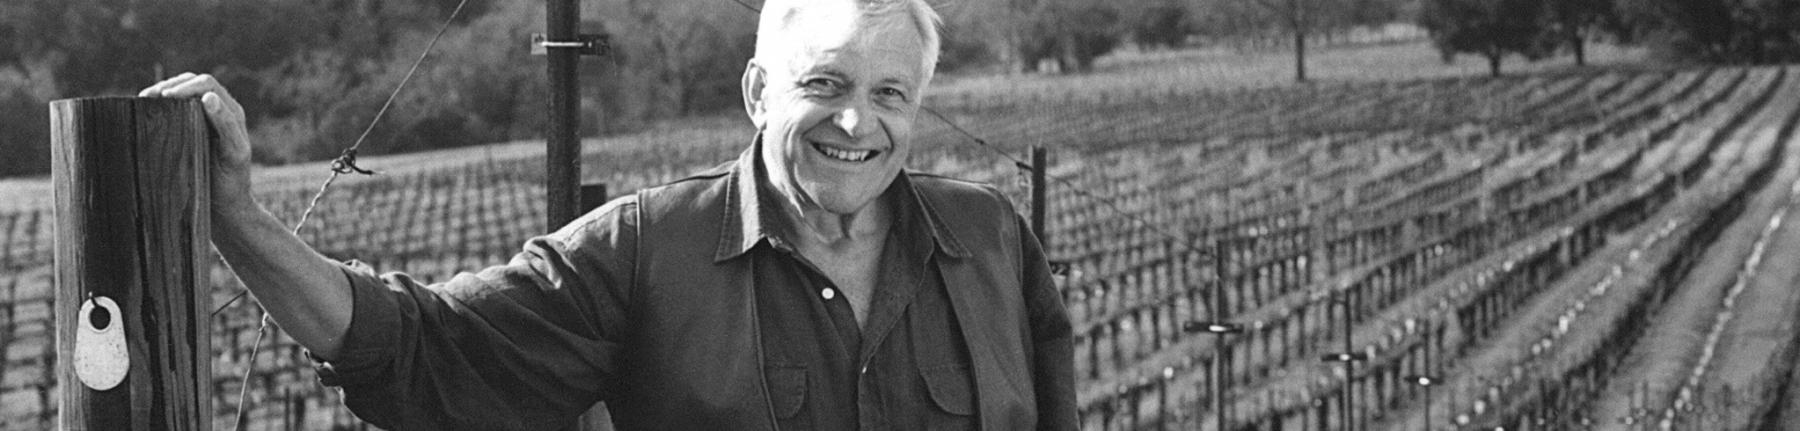 Jackson Family Wines founder Jess Jackson in his vineyard in the early days of the company